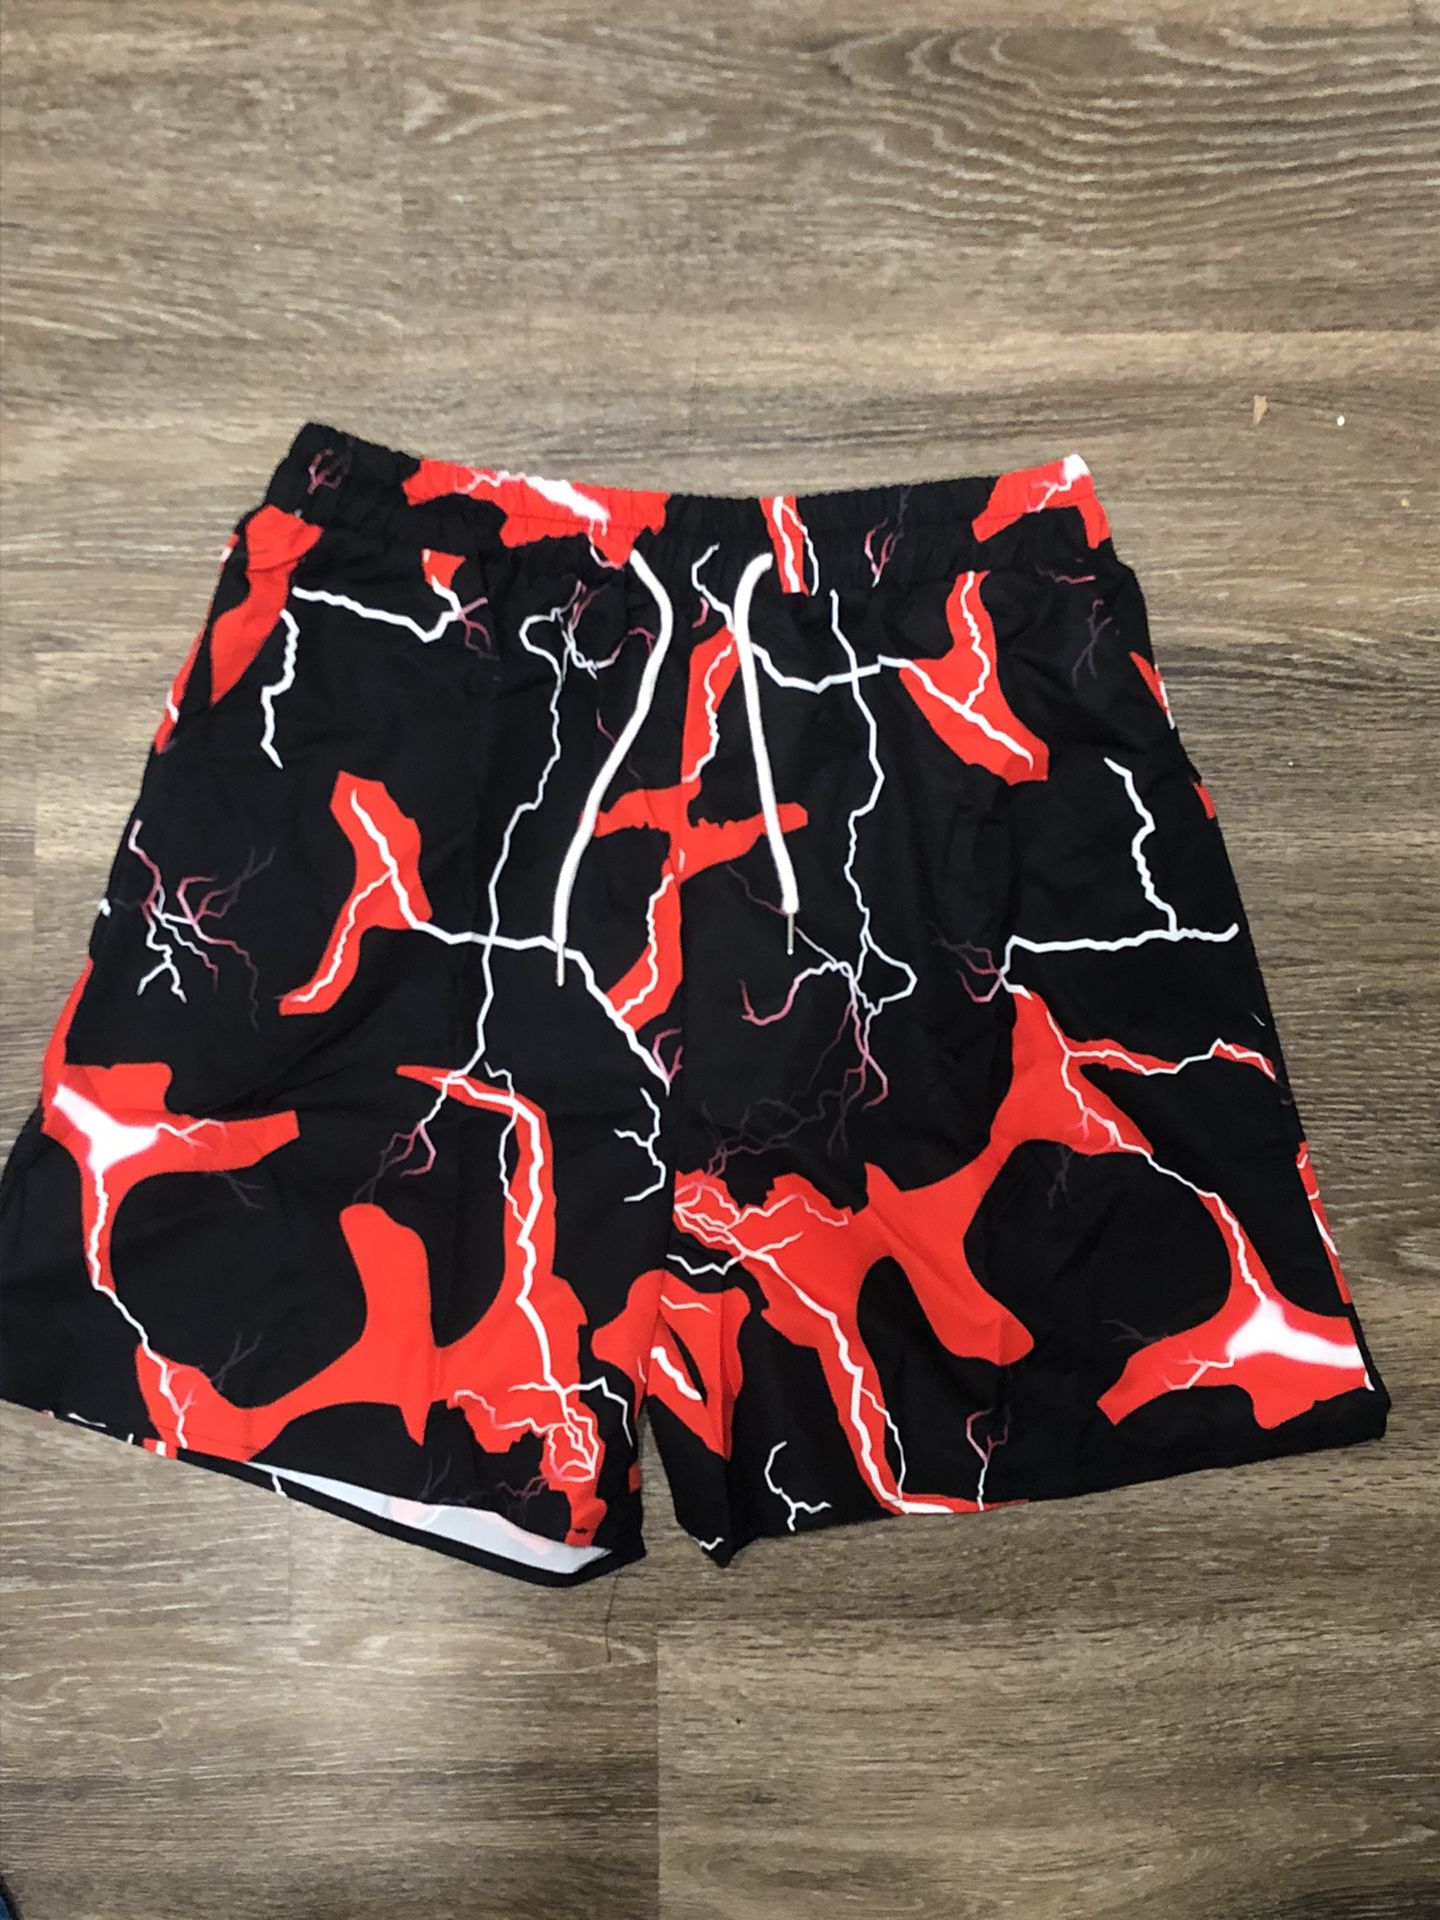 LV Mesh Shorts for Sale in Fresno, CA - OfferUp